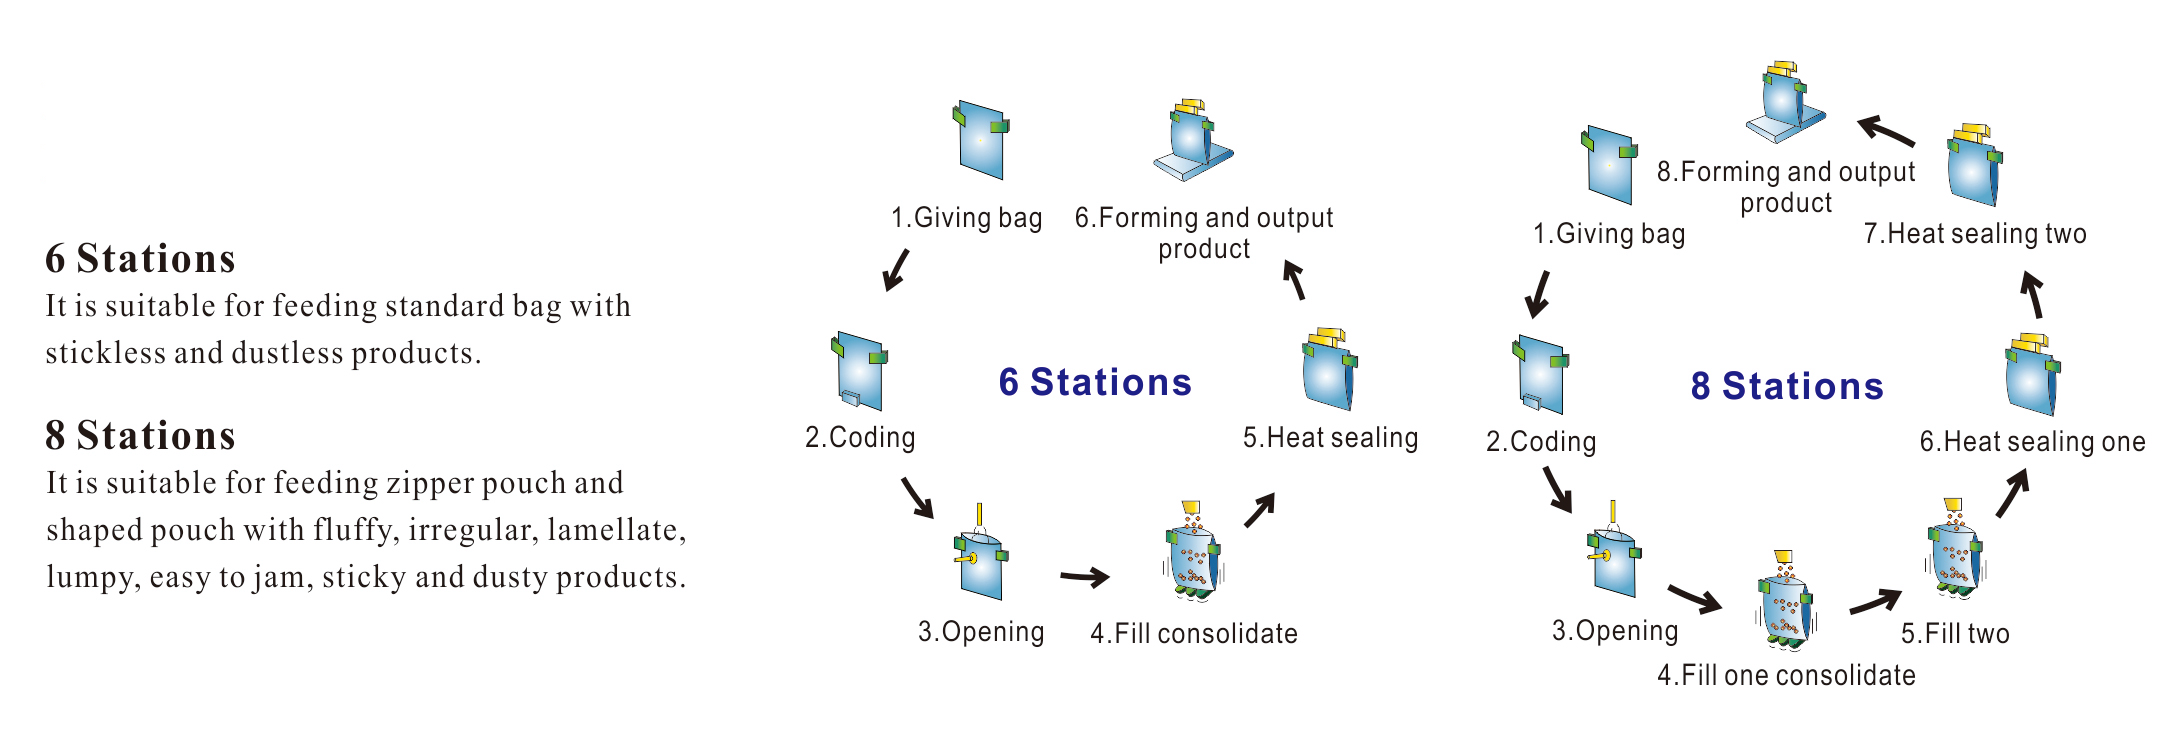 Rotary Packing Machine Process Flow Diagram